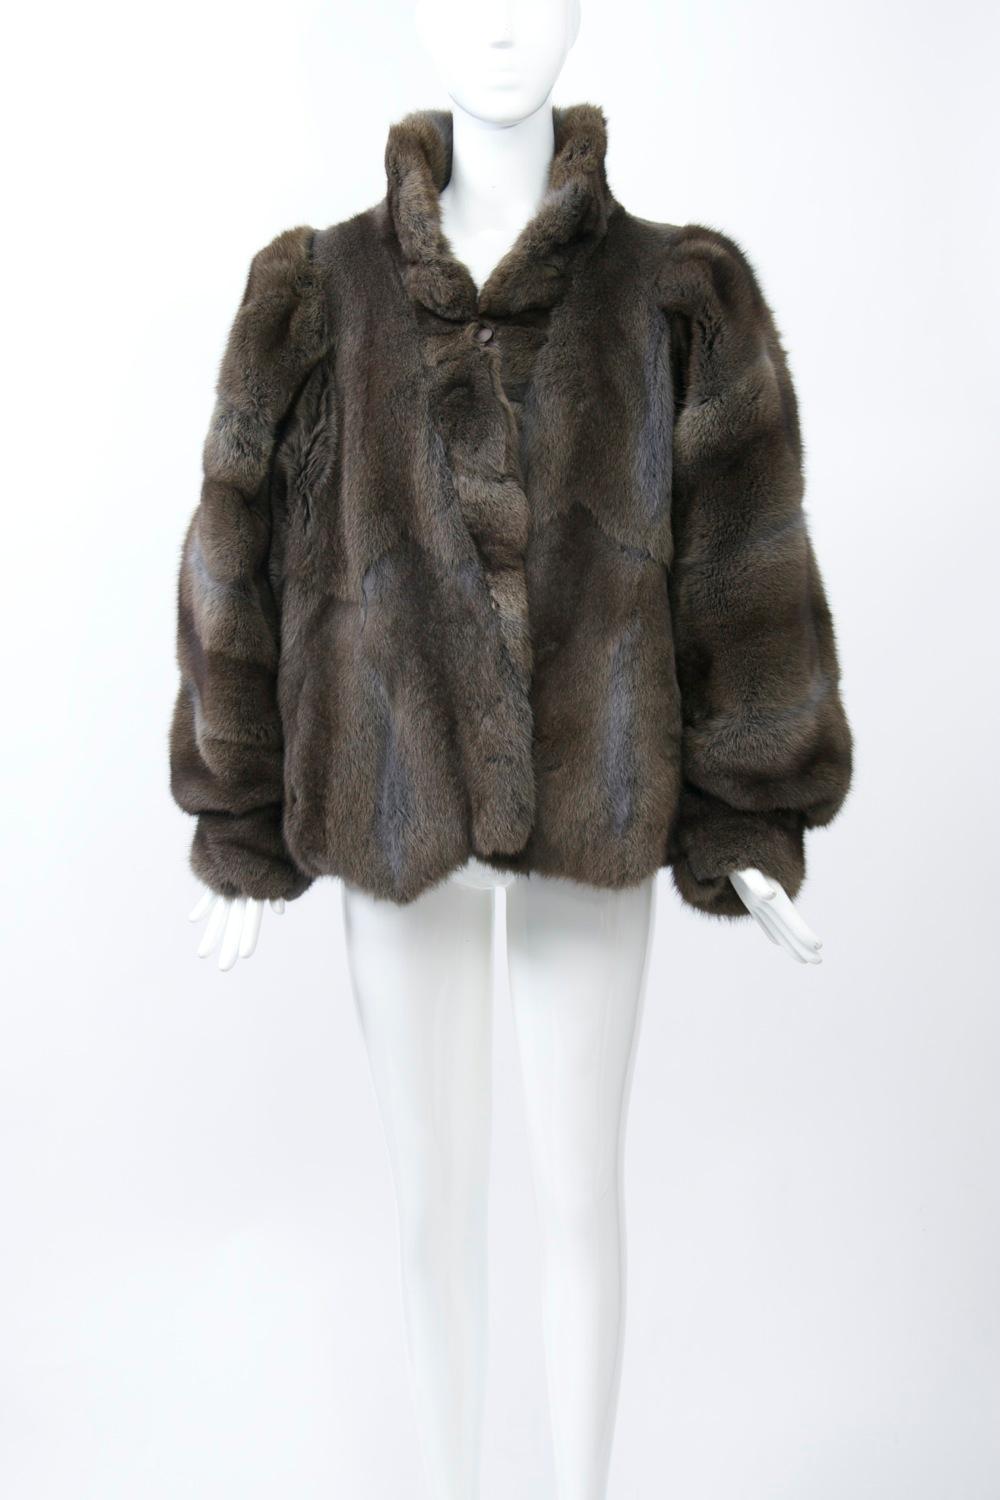 1980s oversized cut in this hip-length sheared fur jacket, possibly opossum or raccoon. The fur is lush and cut in flat, broad pieces throughout the body with their zigzag edging also finishing the hem. The full sleeves are worked with horizontal